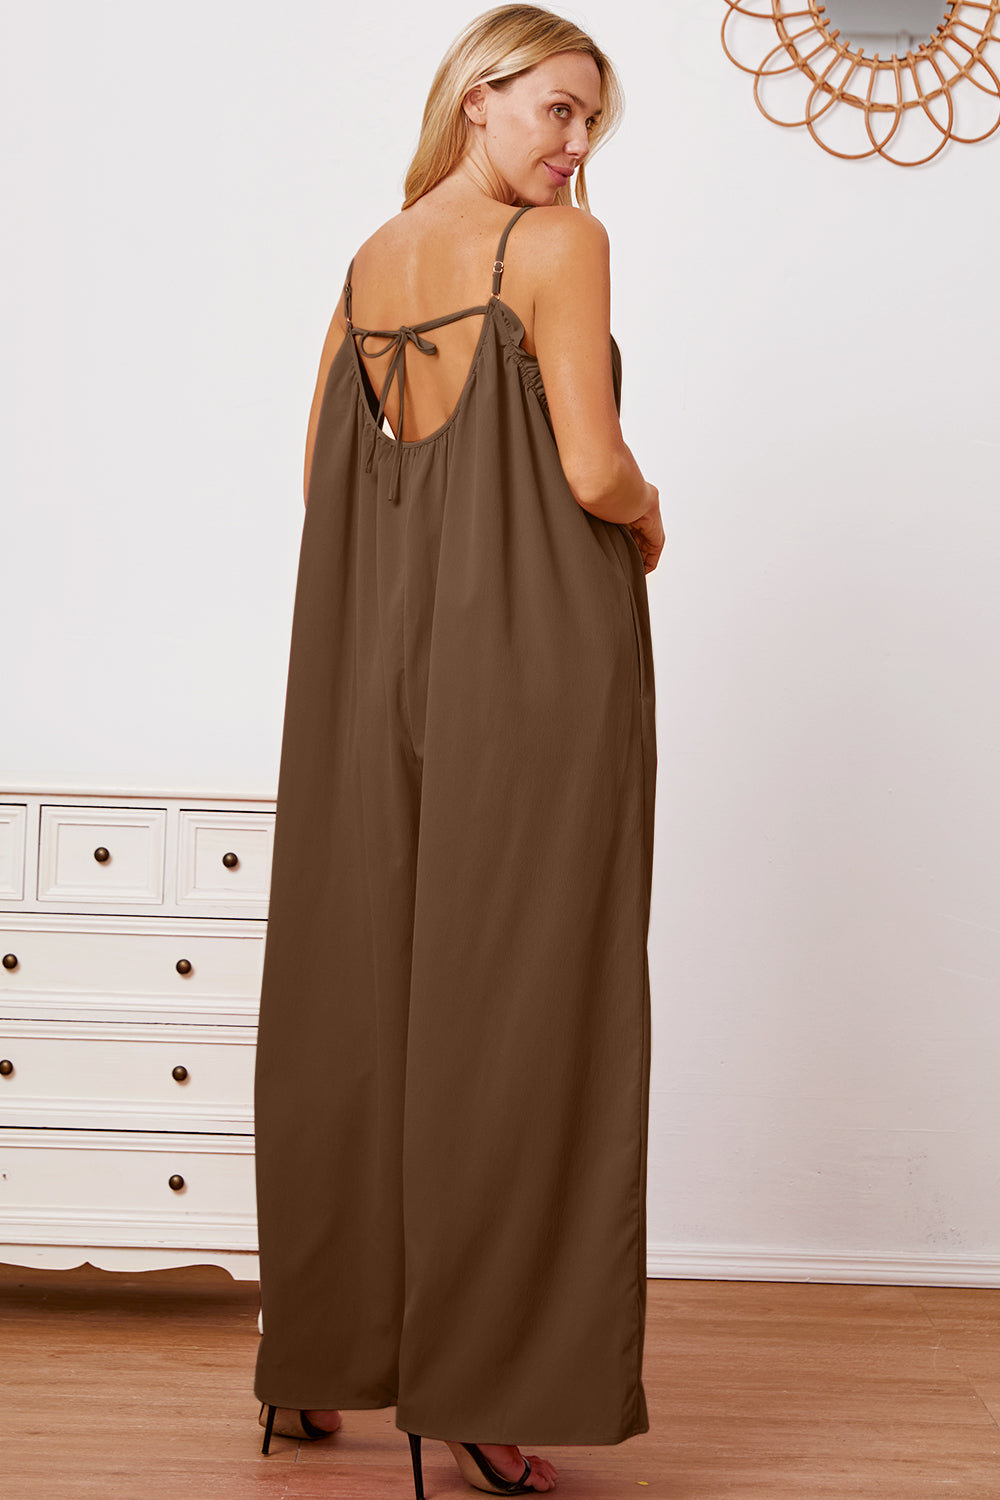 Double Take Full Size Ruffle Trim Tie Back Cami Jumpsuit with Pockets (2 colors)